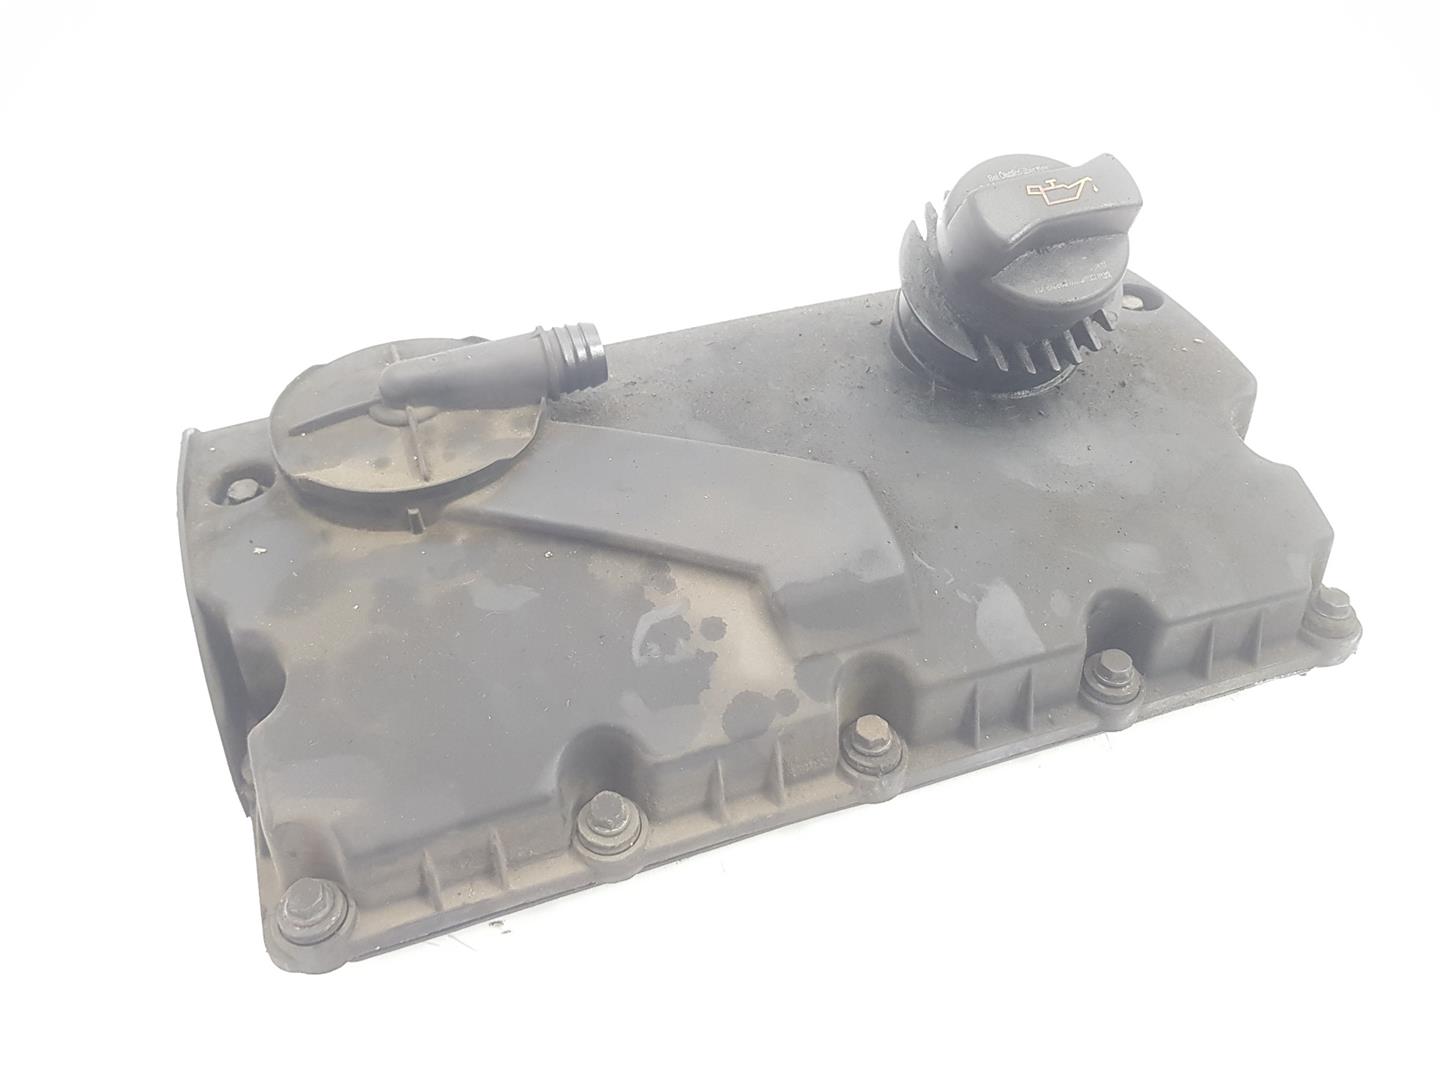 VOLKSWAGEN Caddy 3 generation (2004-2015) Valve Cover 038103469AD, 038103475N 19910283